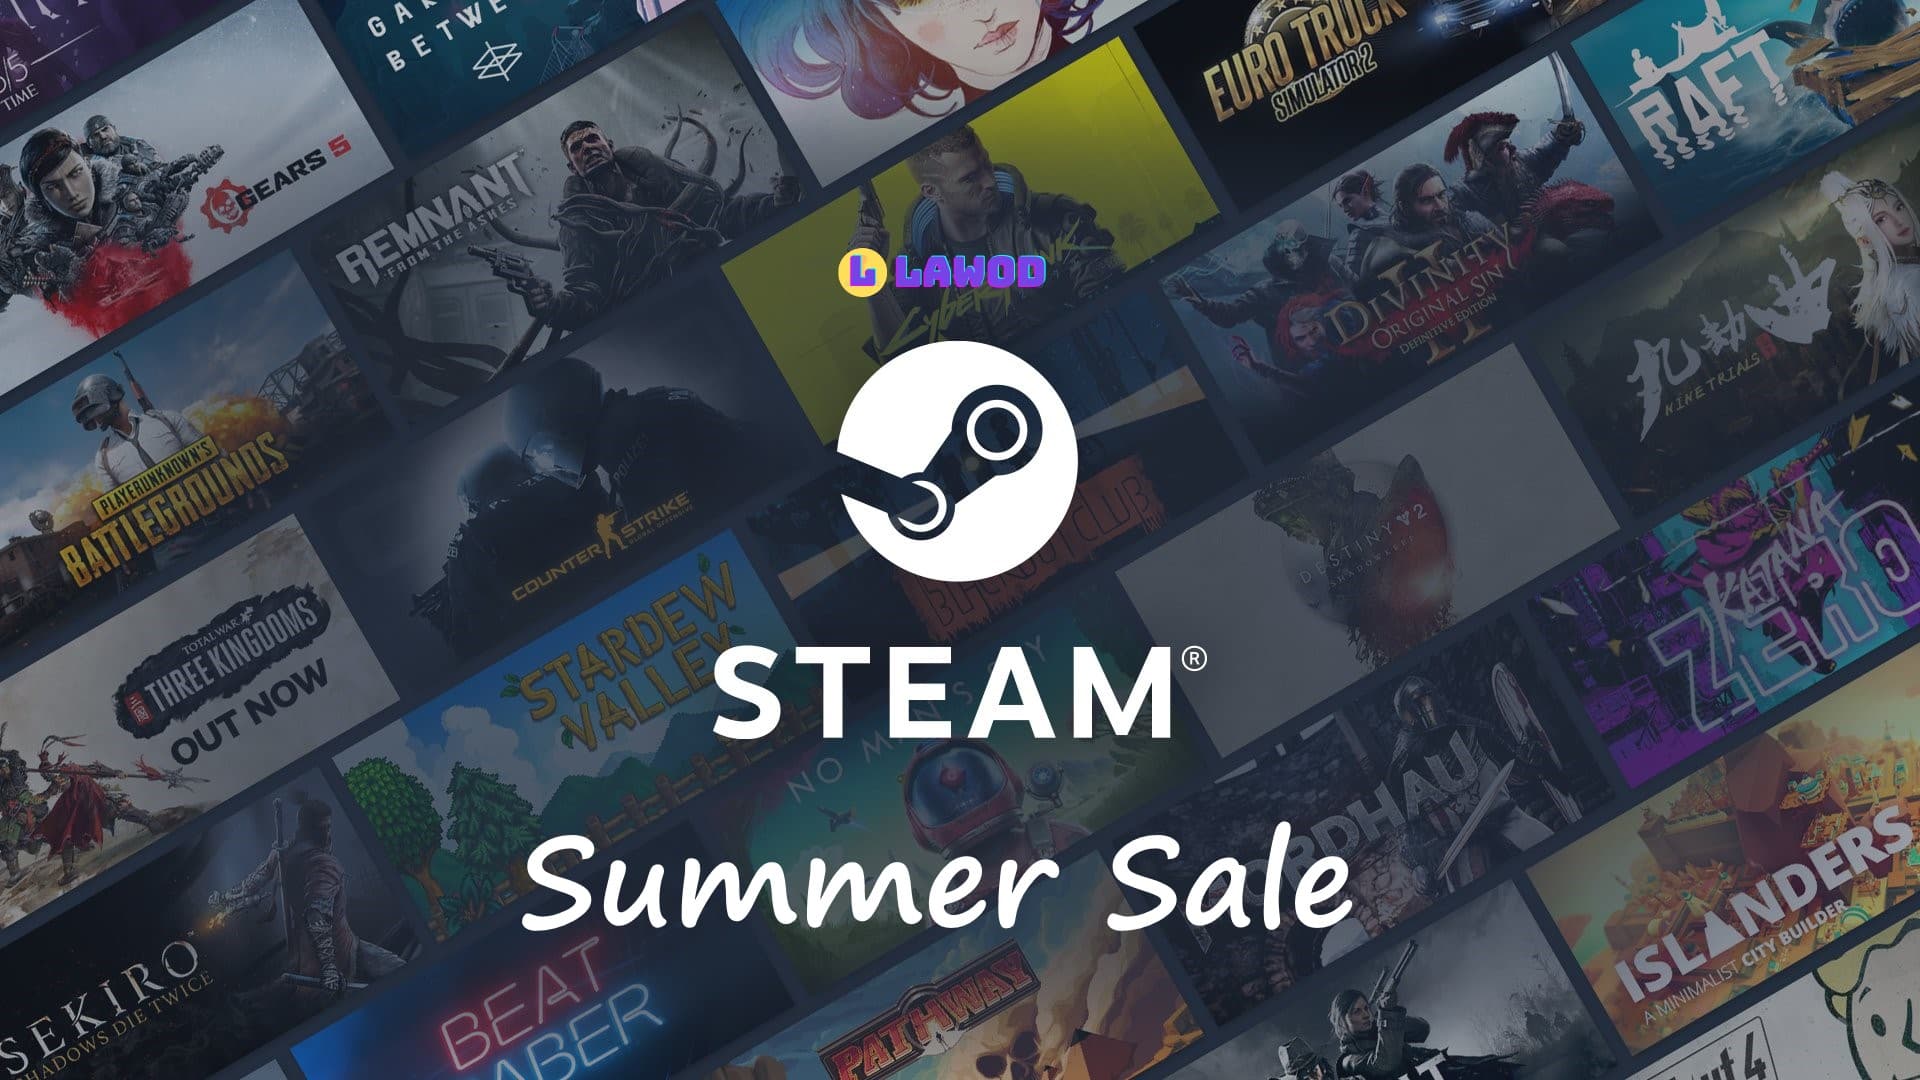 Steam Summer Sale Has Been Started Lawod